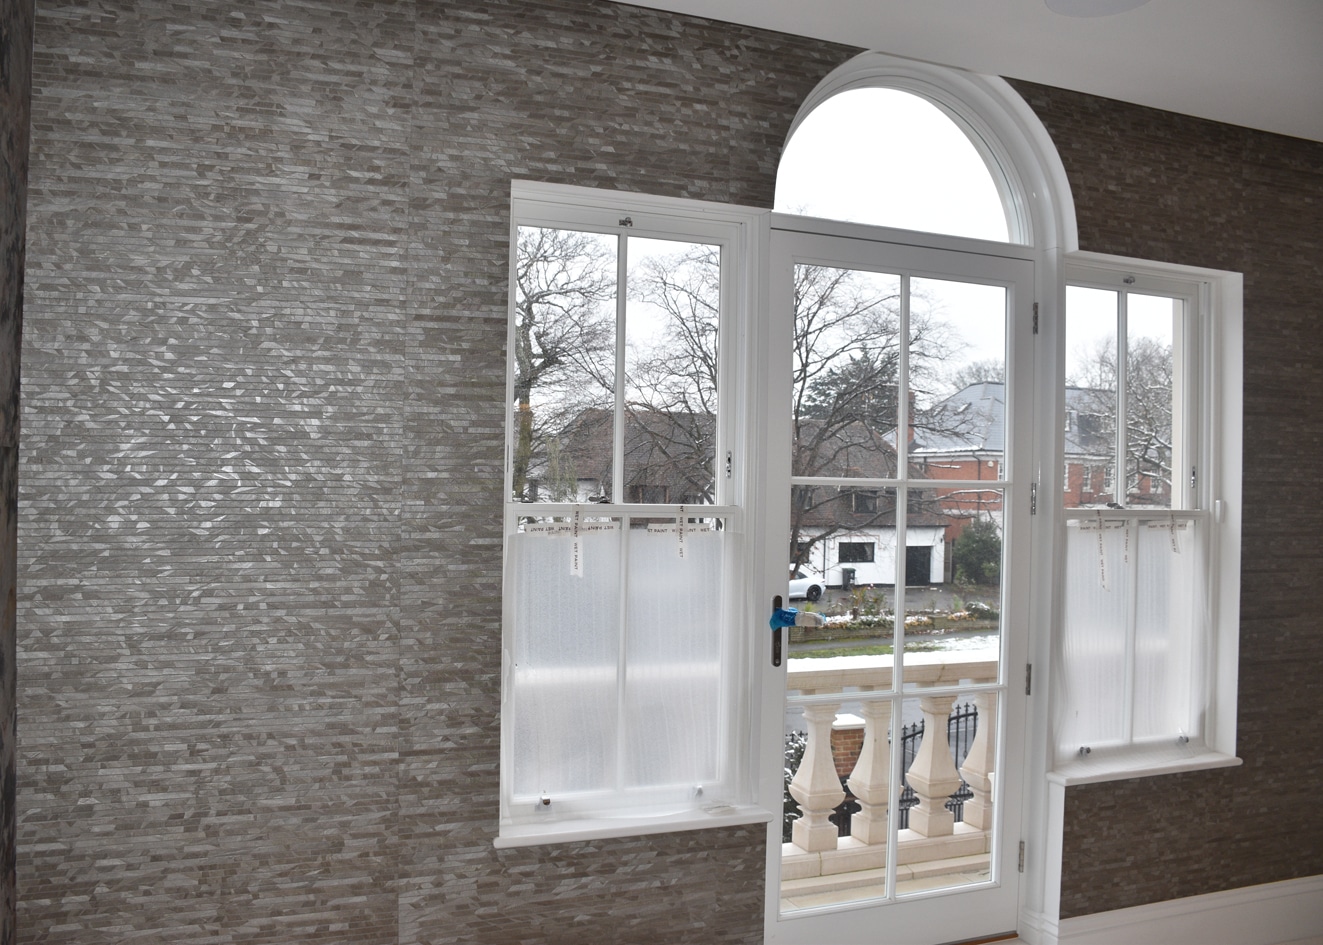 Altfield London wallcovering in silver next to a window.